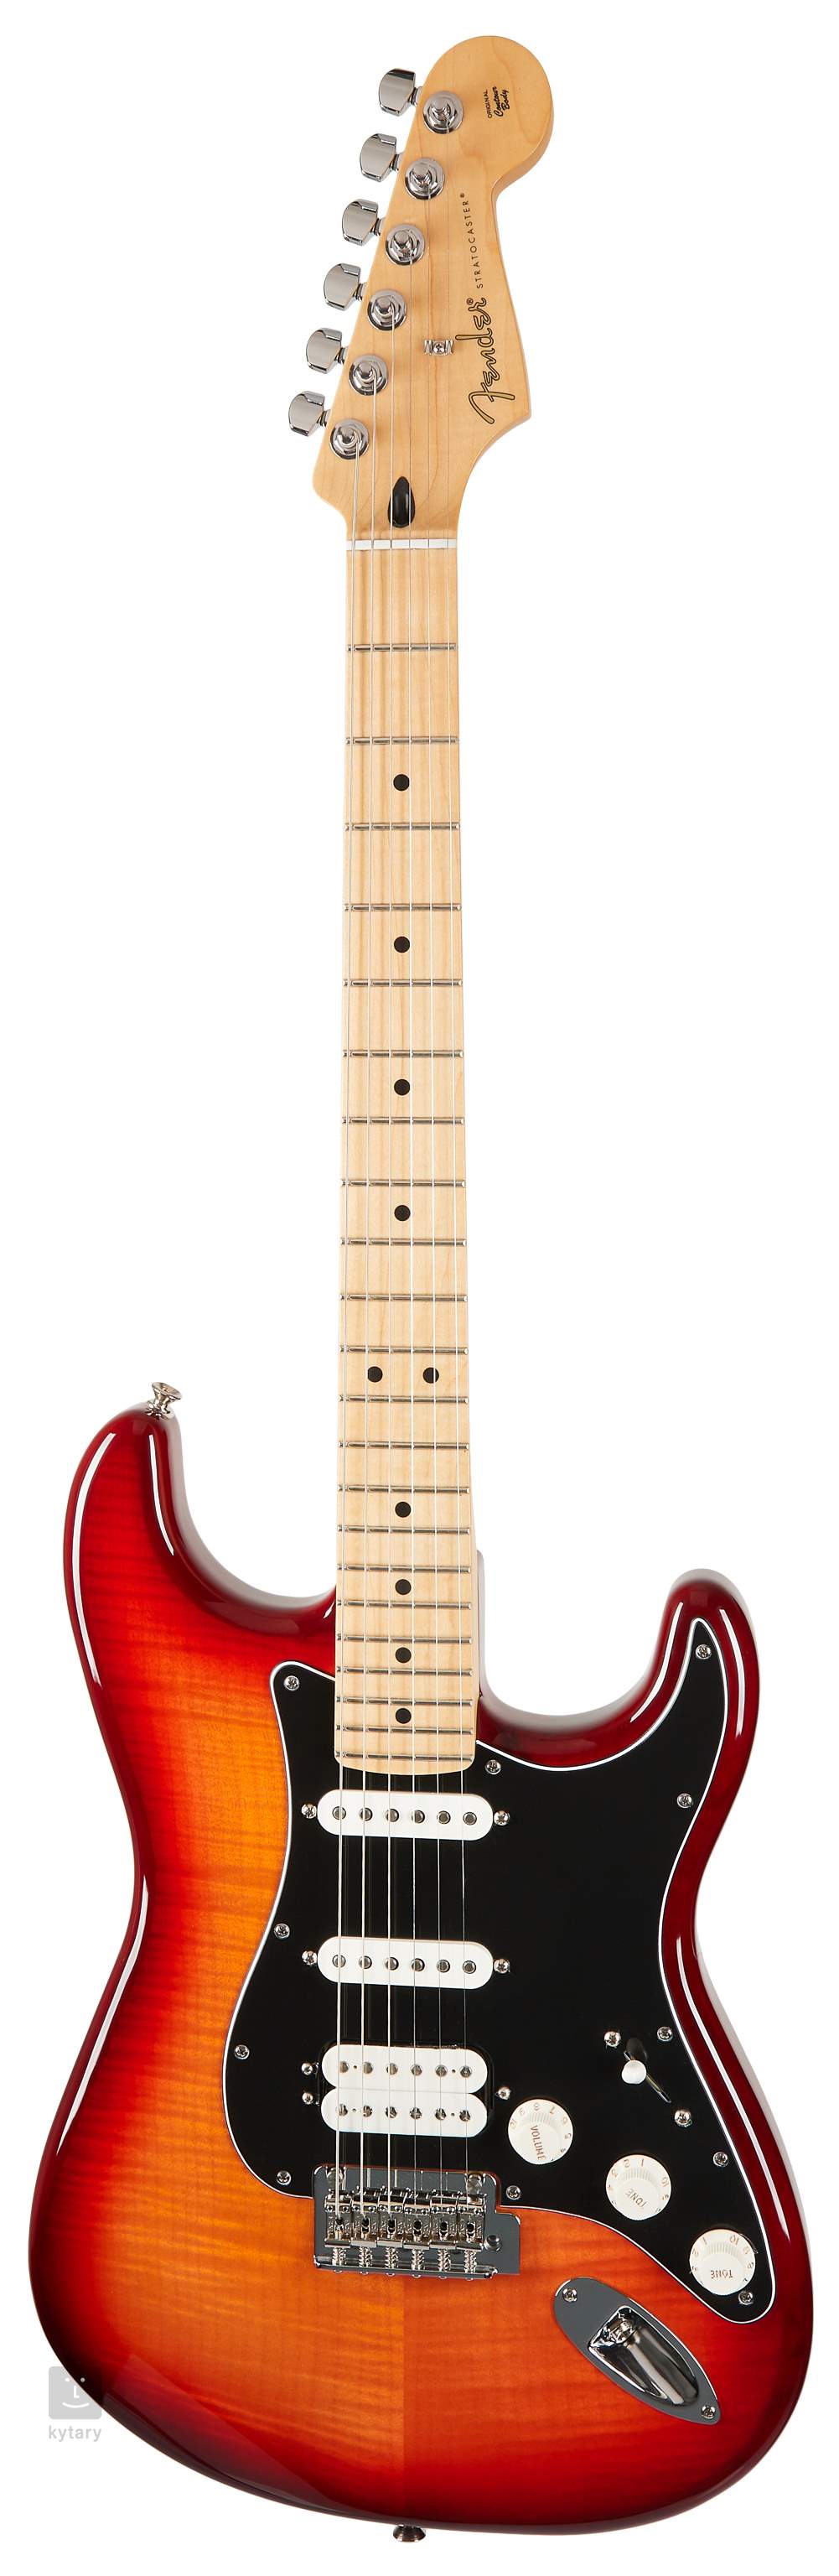 FENDER Player Stratocaster HSS Plus Top MN ACB Electric Guitar